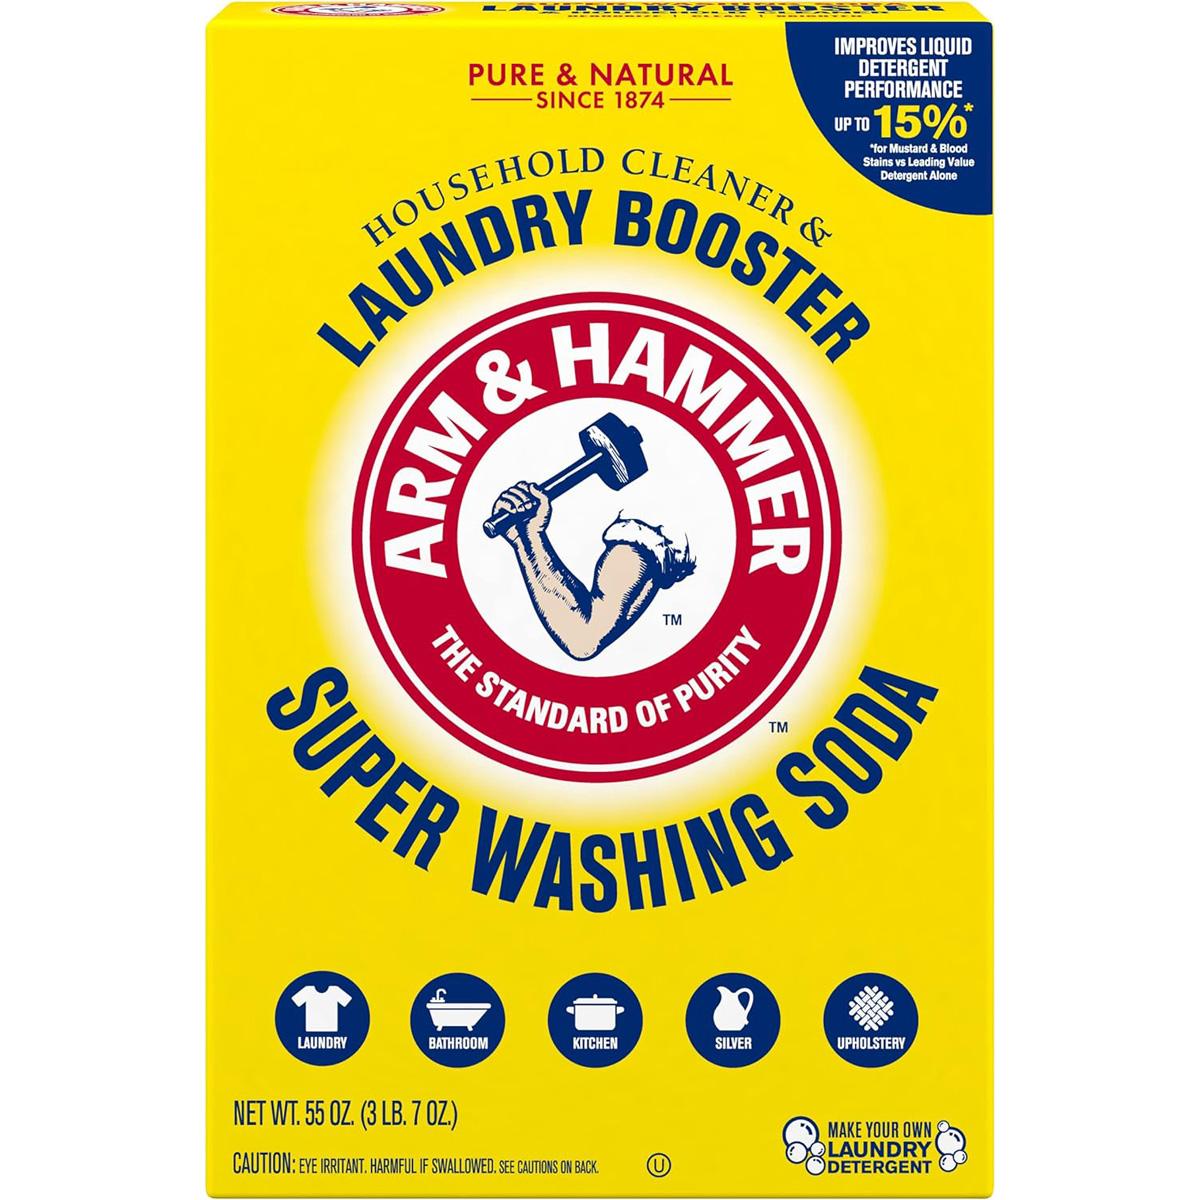 Arm and Hammer Super Washing Soda Detergent Booster Household Cleaner for $3.77